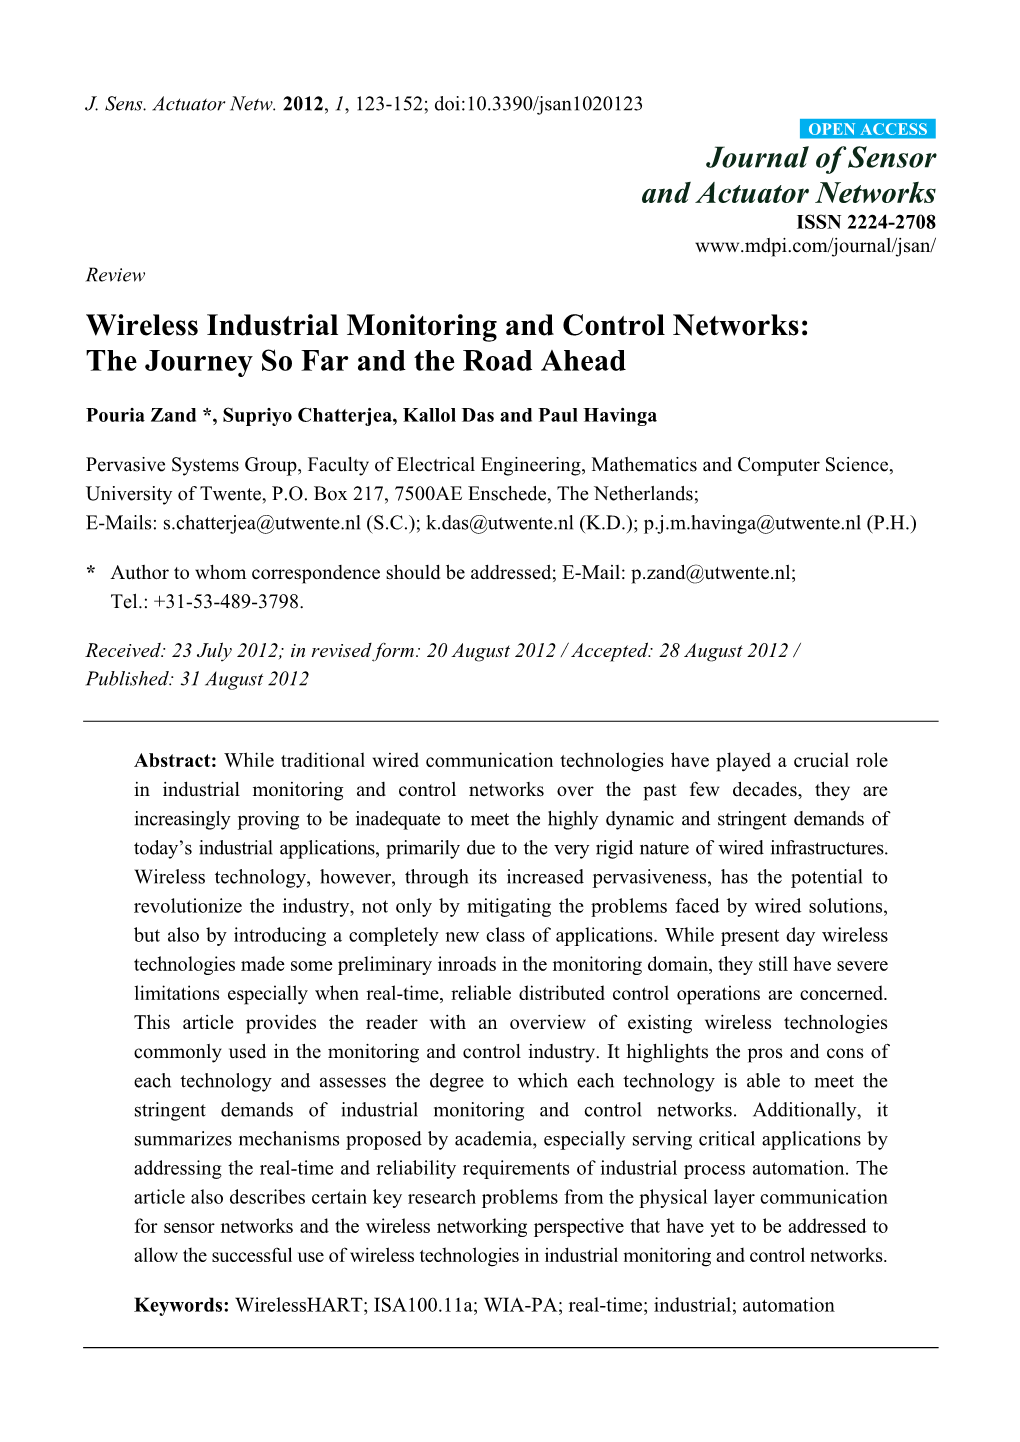 Wireless Industrial Monitoring and Control Networks: the Journey So Far and the Road Ahead